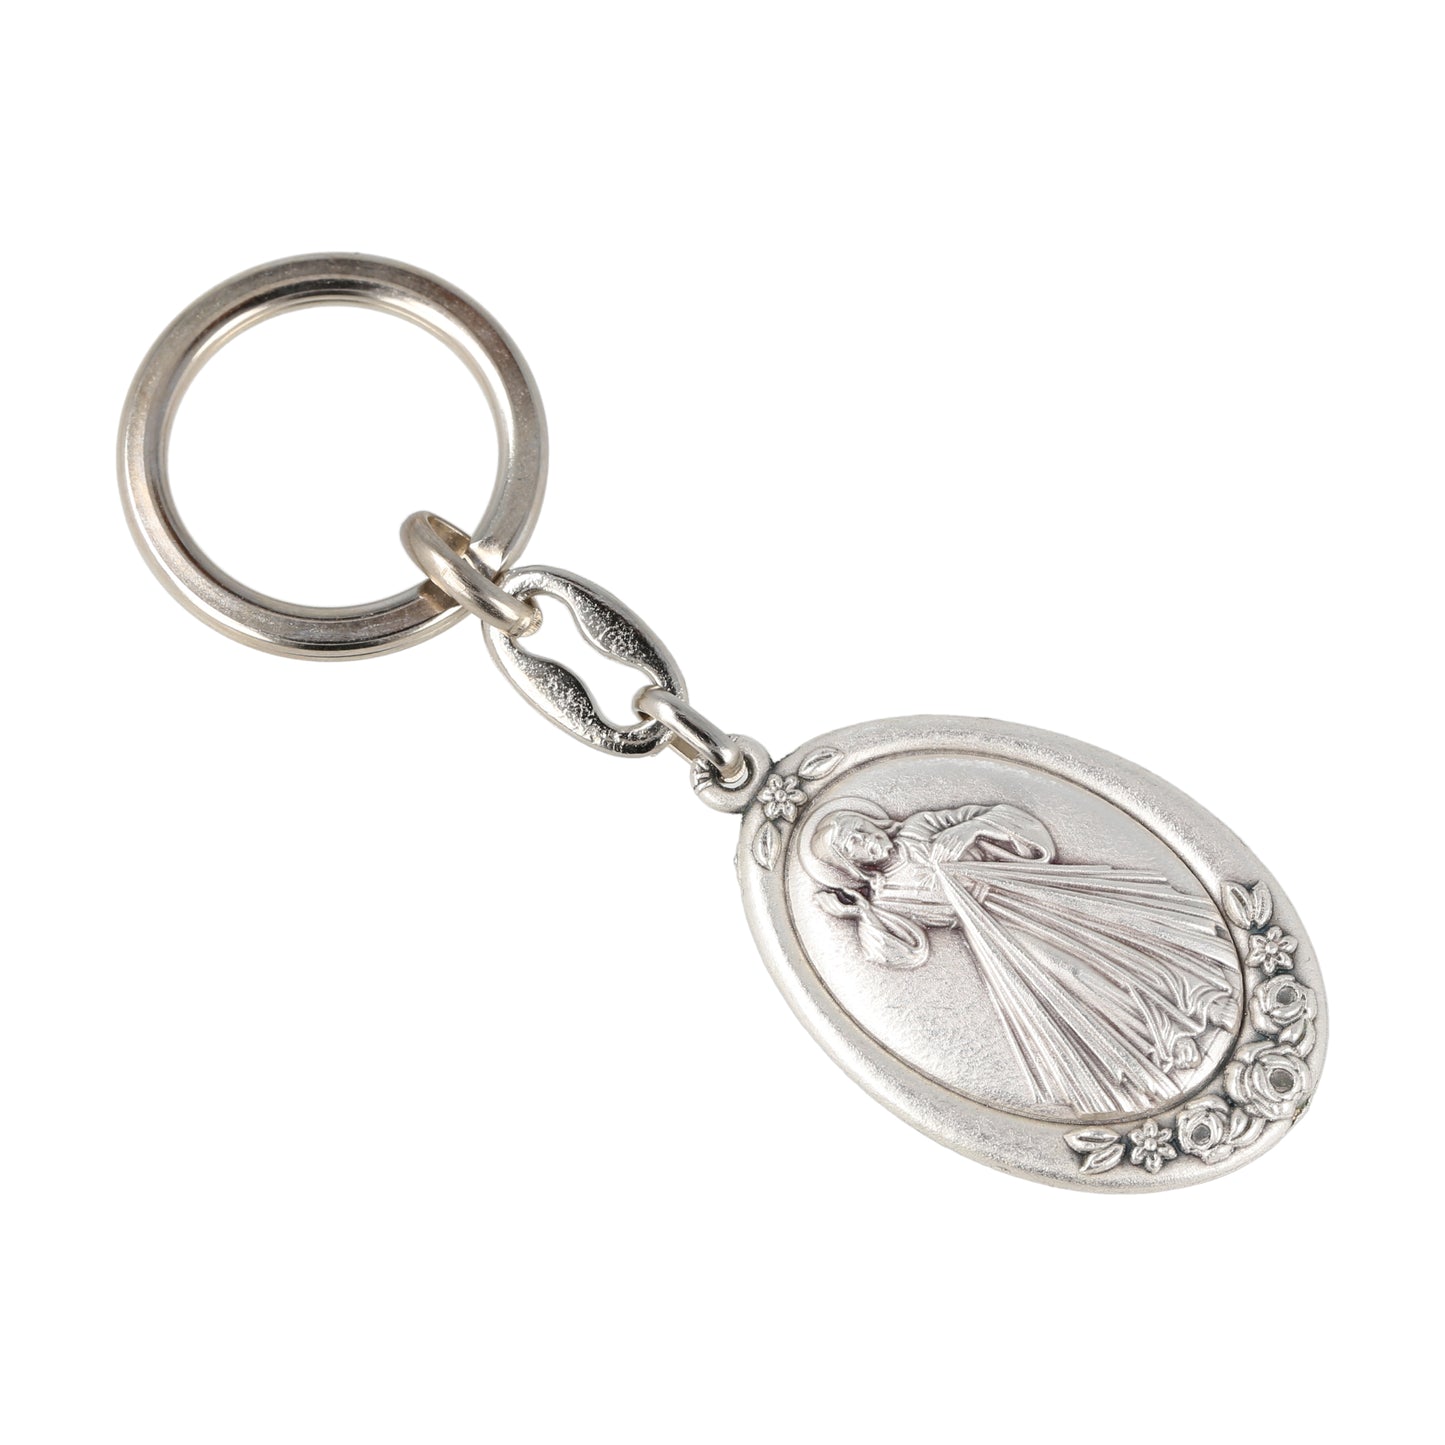 Keychain Merciful Jesus Oval Silvery With Flowers. Souvenirs from Italy